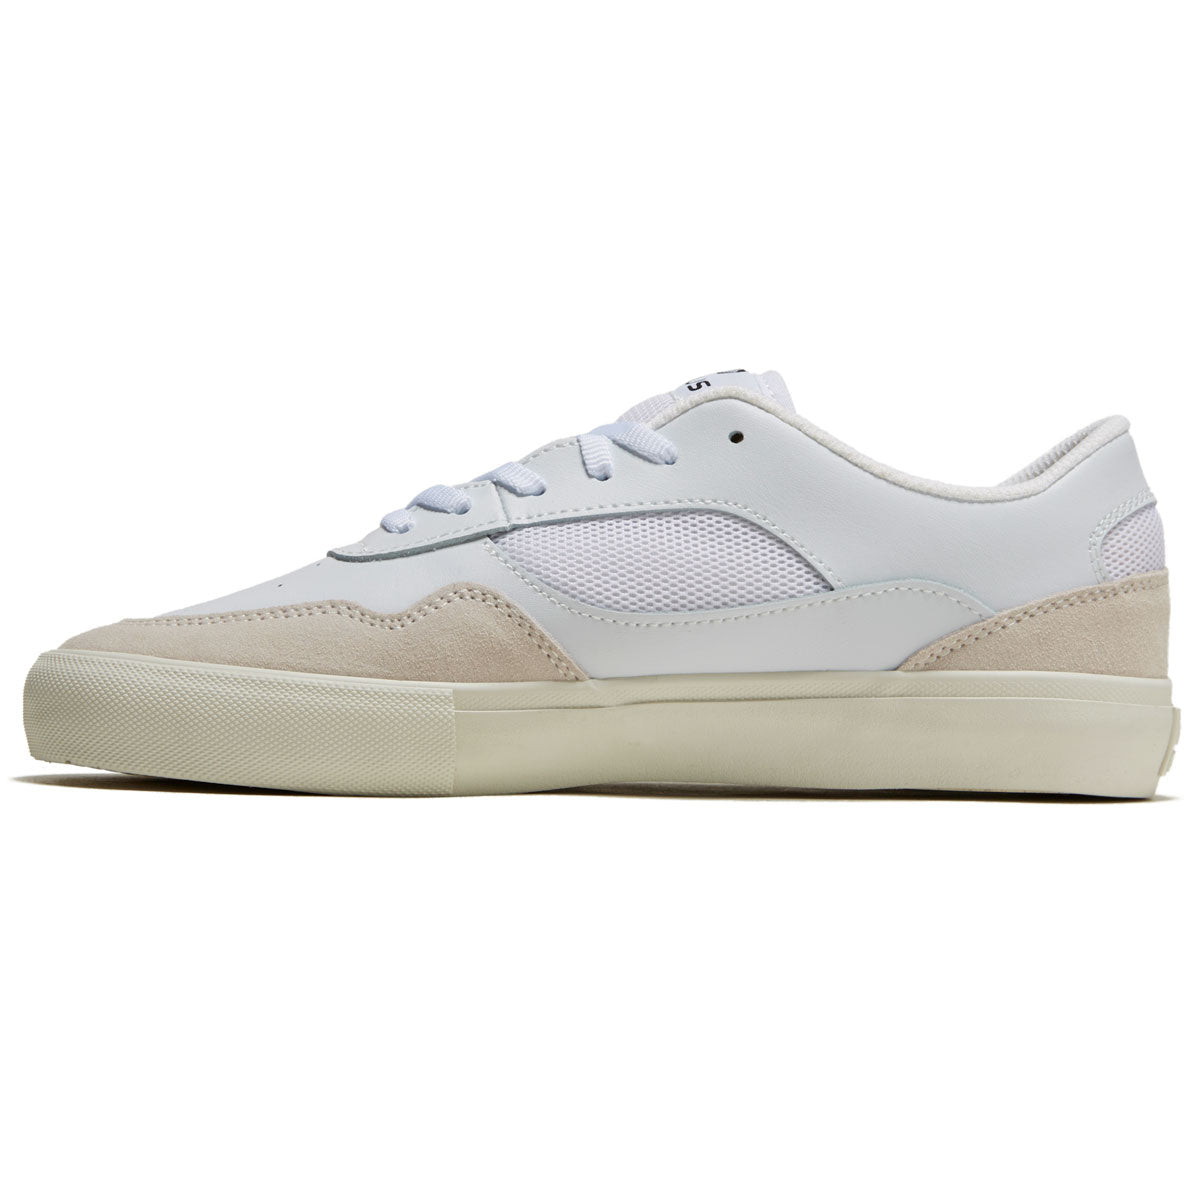 Opus Standard Low Shoes - Off White/Cream image 2